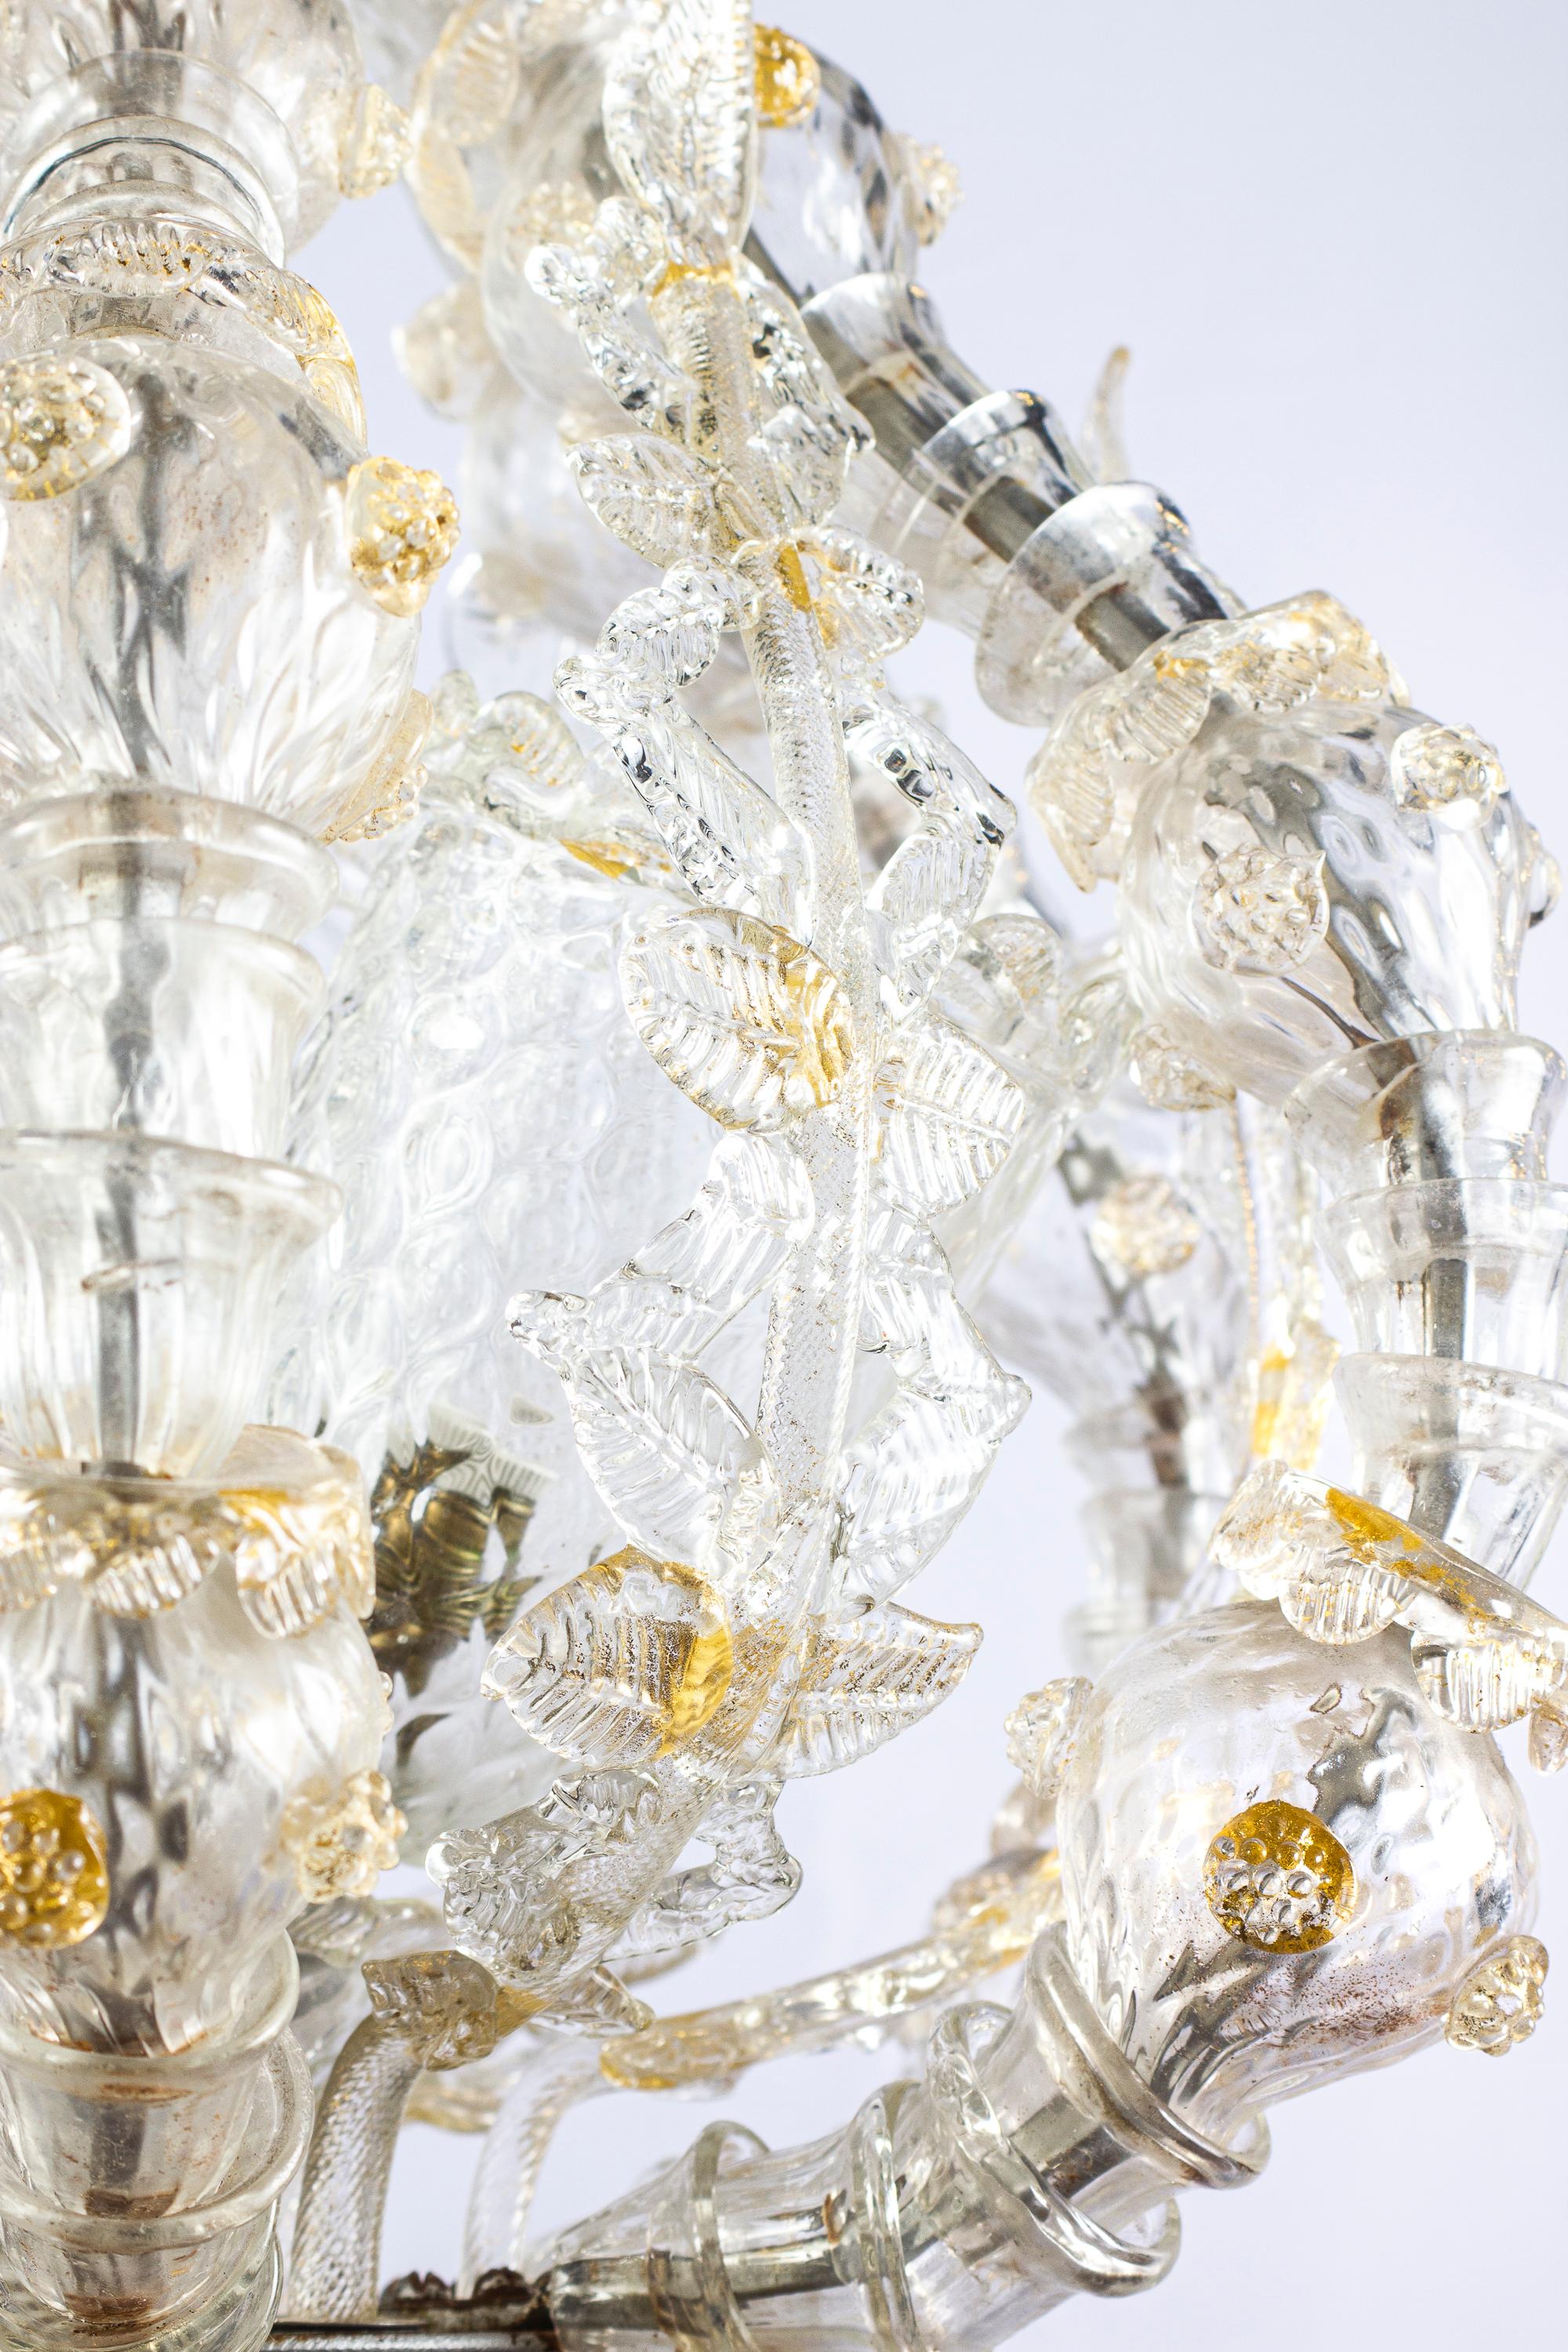 Overwhelming Murano Glass Lantern or Chandelier by Barovier & Toso, 1940' For Sale 4